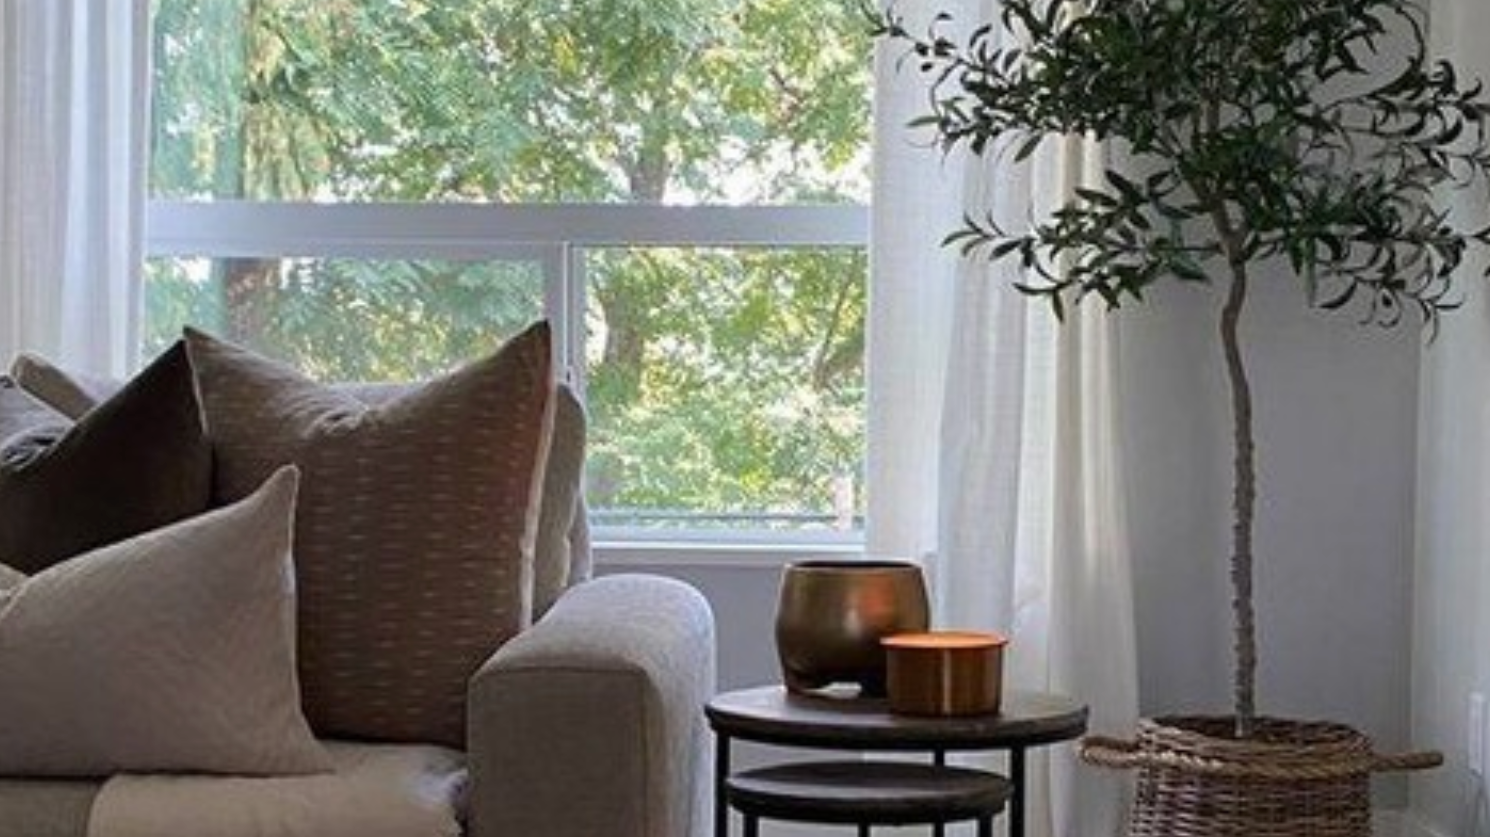 Pros And Cons Of Faux Plants Compared To Real Plants